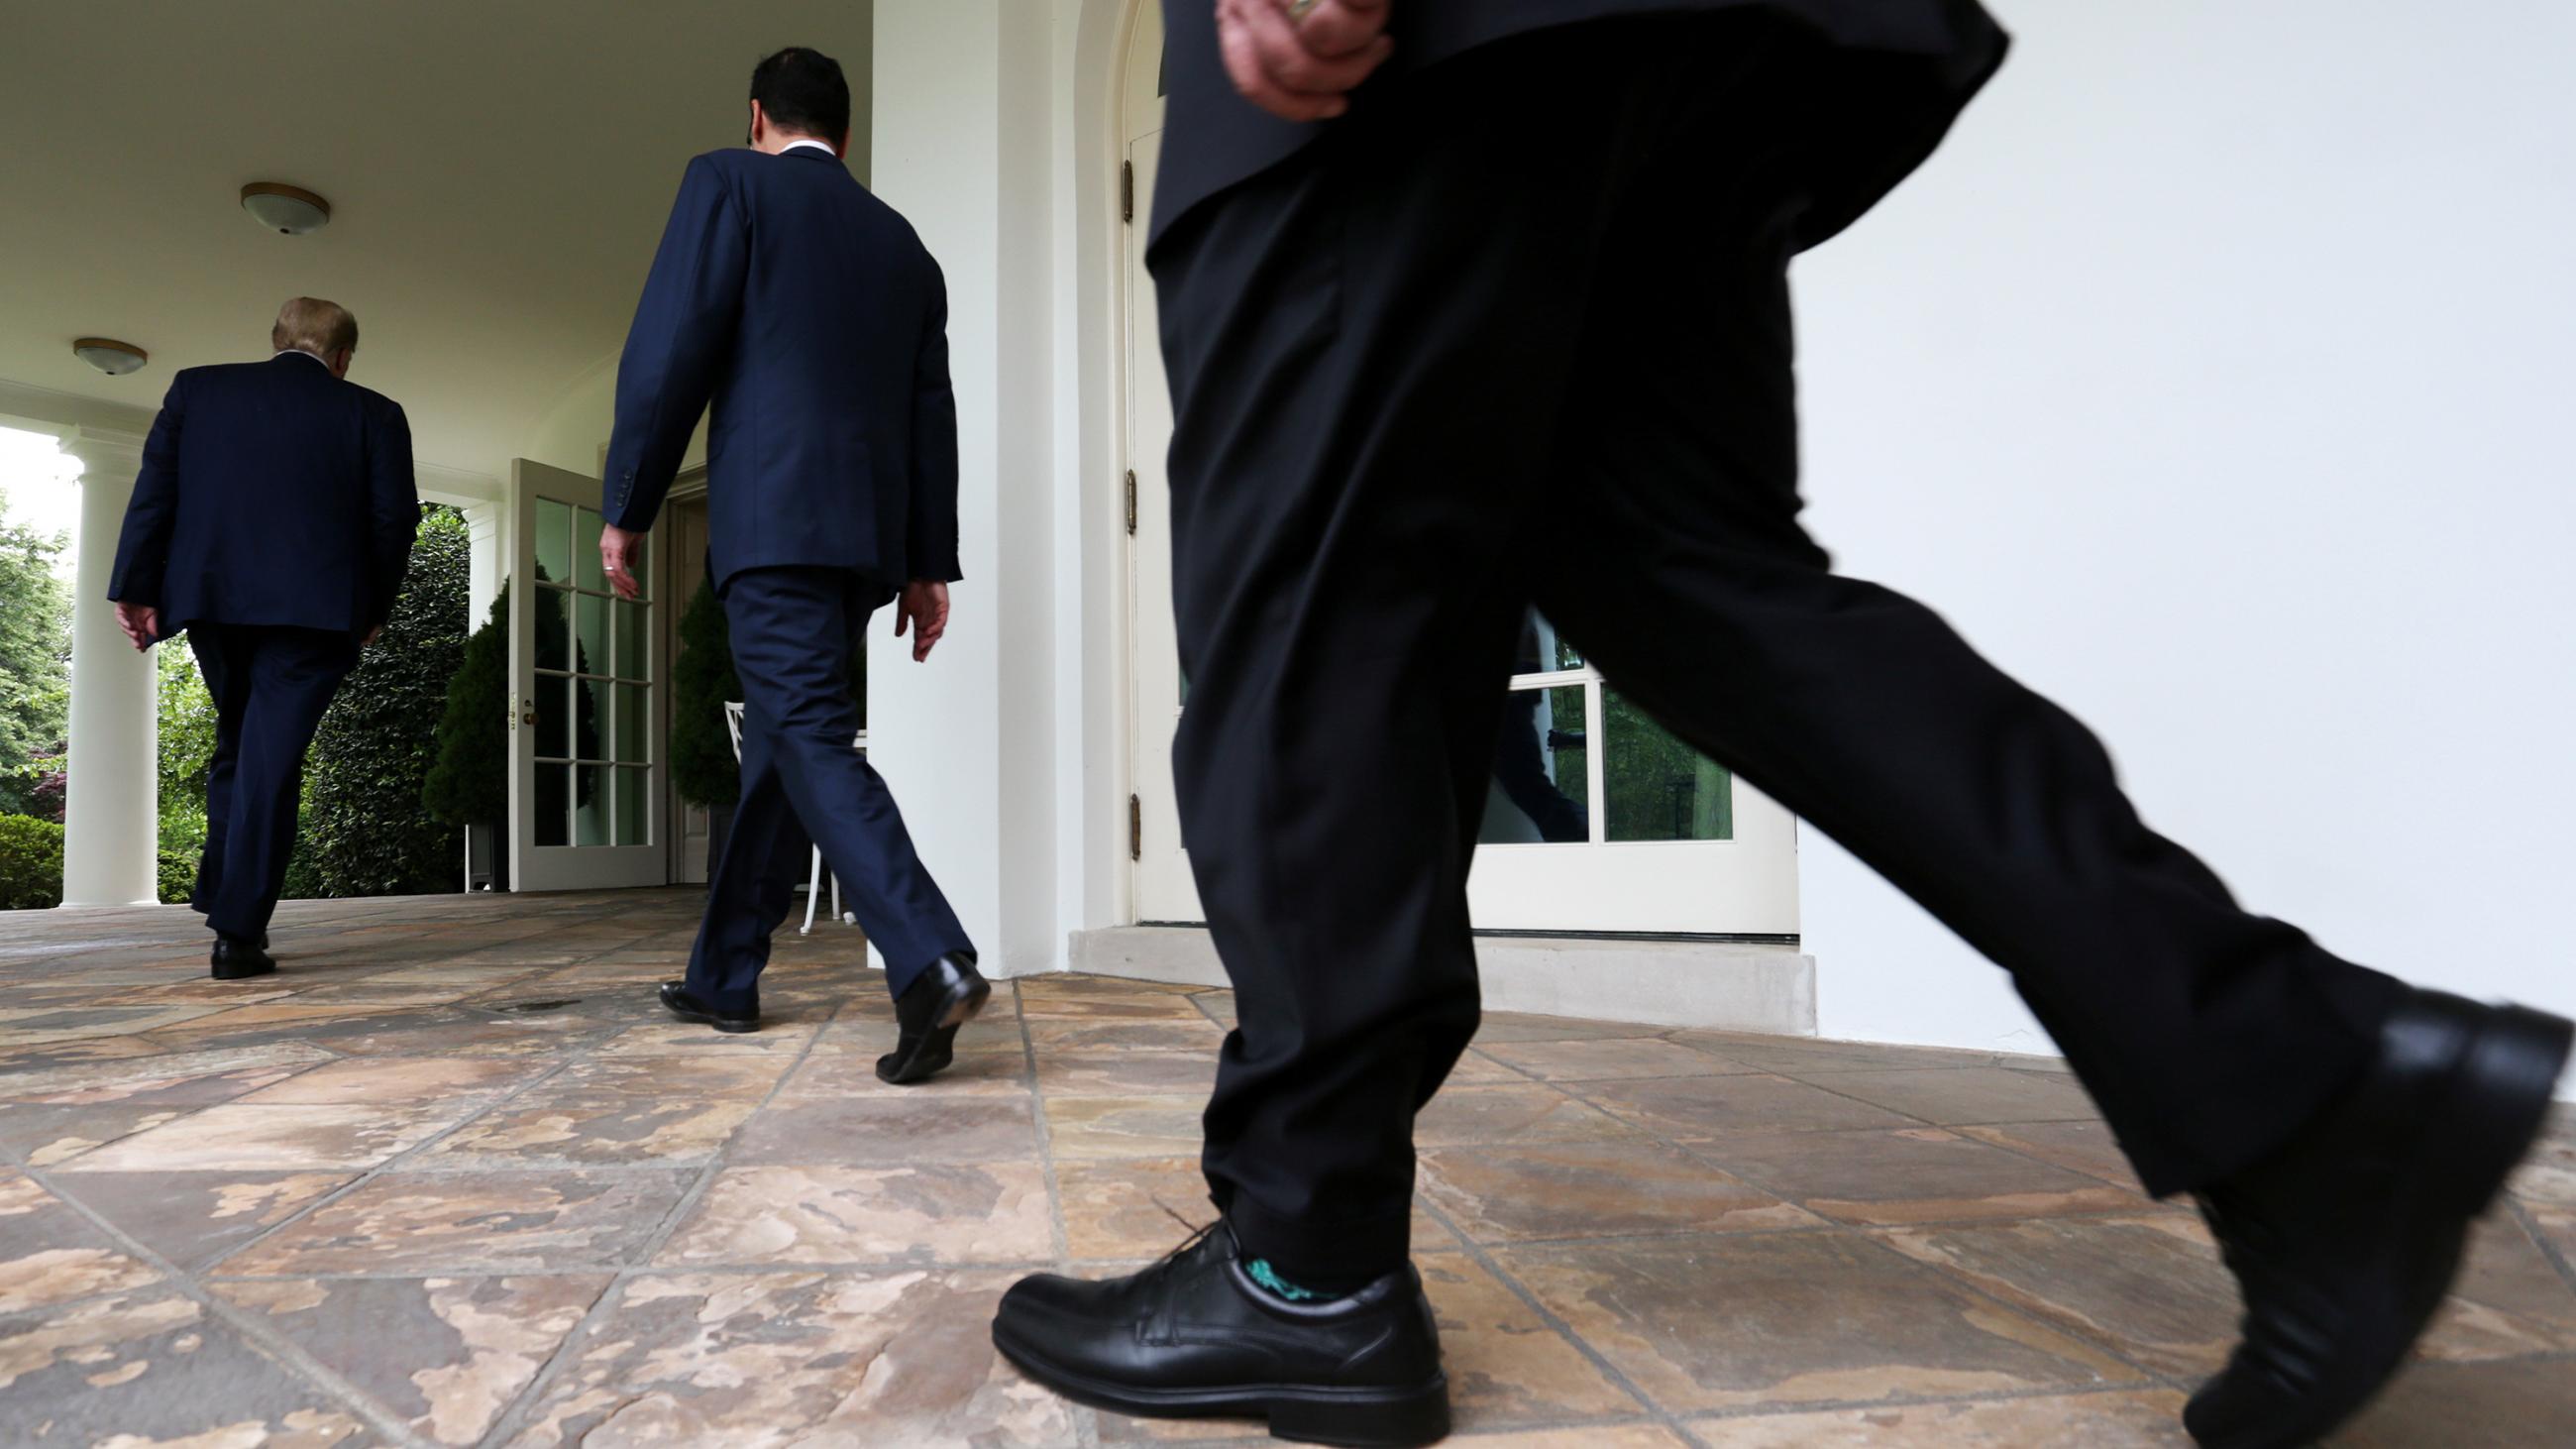 The photo shows the lower portion of the president walking past the camera with Treasury Secretary Steven Mnuchin and Secretary of State Mike Pompeo slightly ahead. 